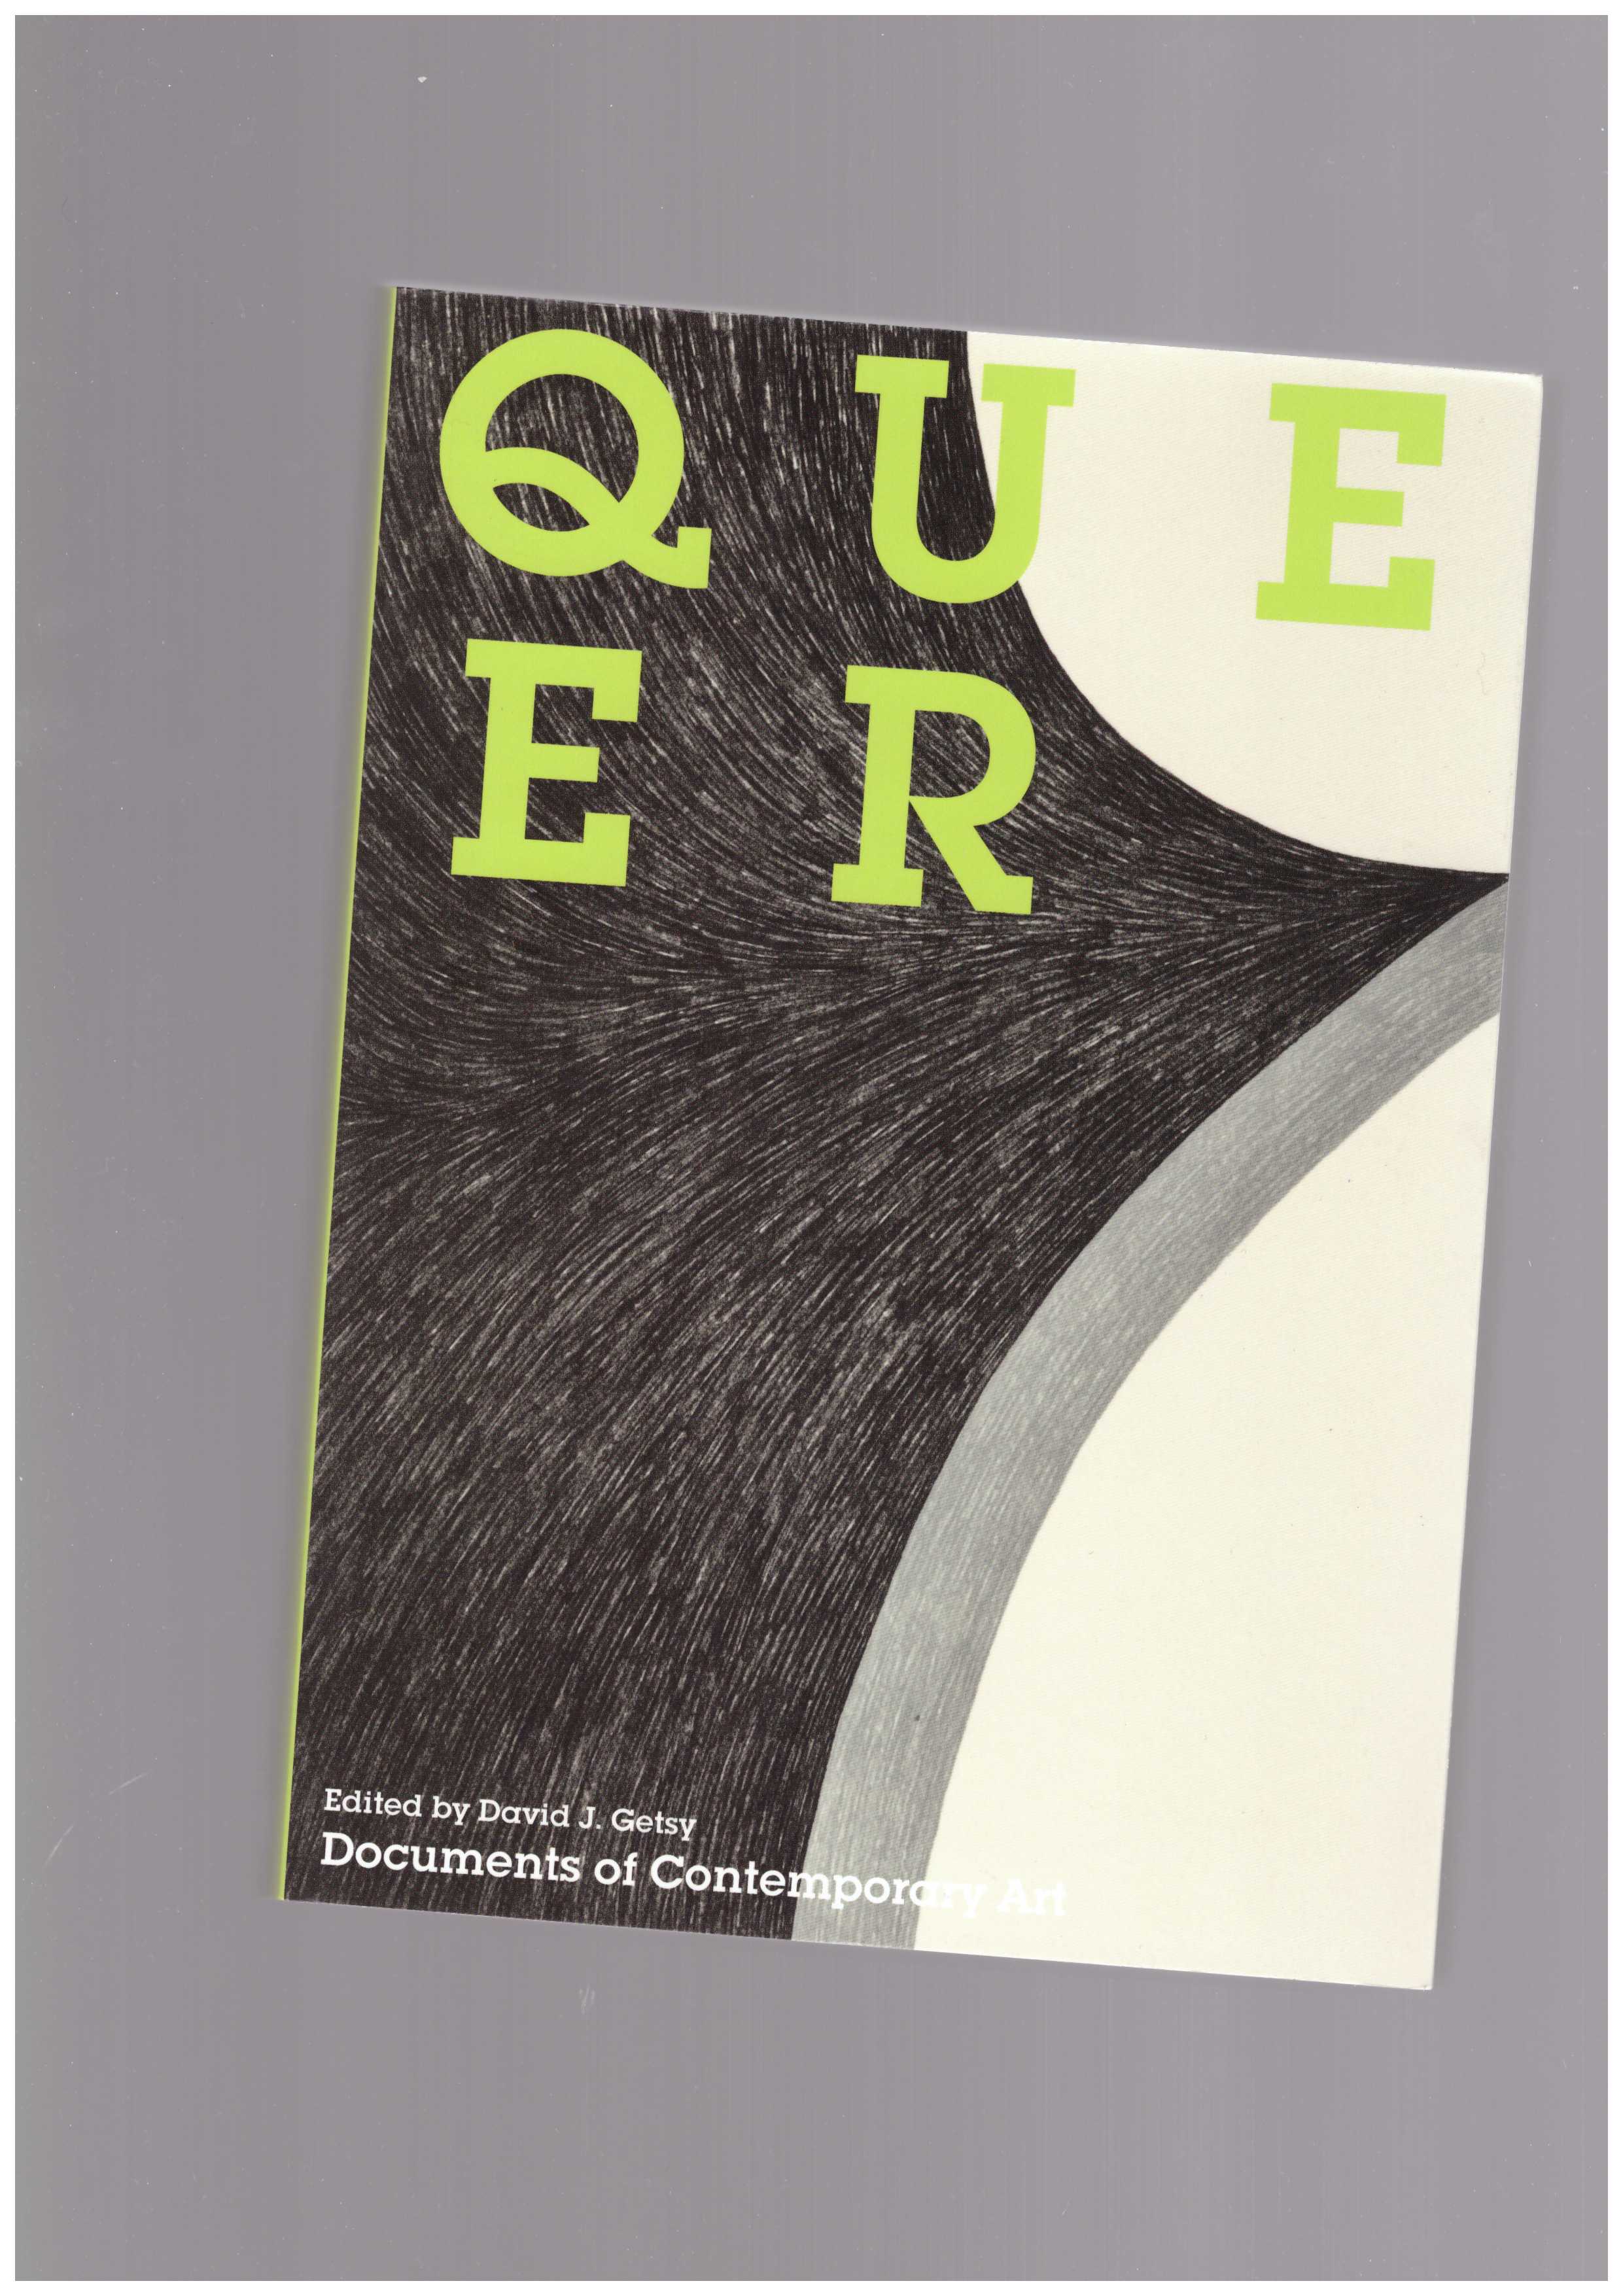 GETSY, David J. (ed) - Documents of Contemporary Art: Queer